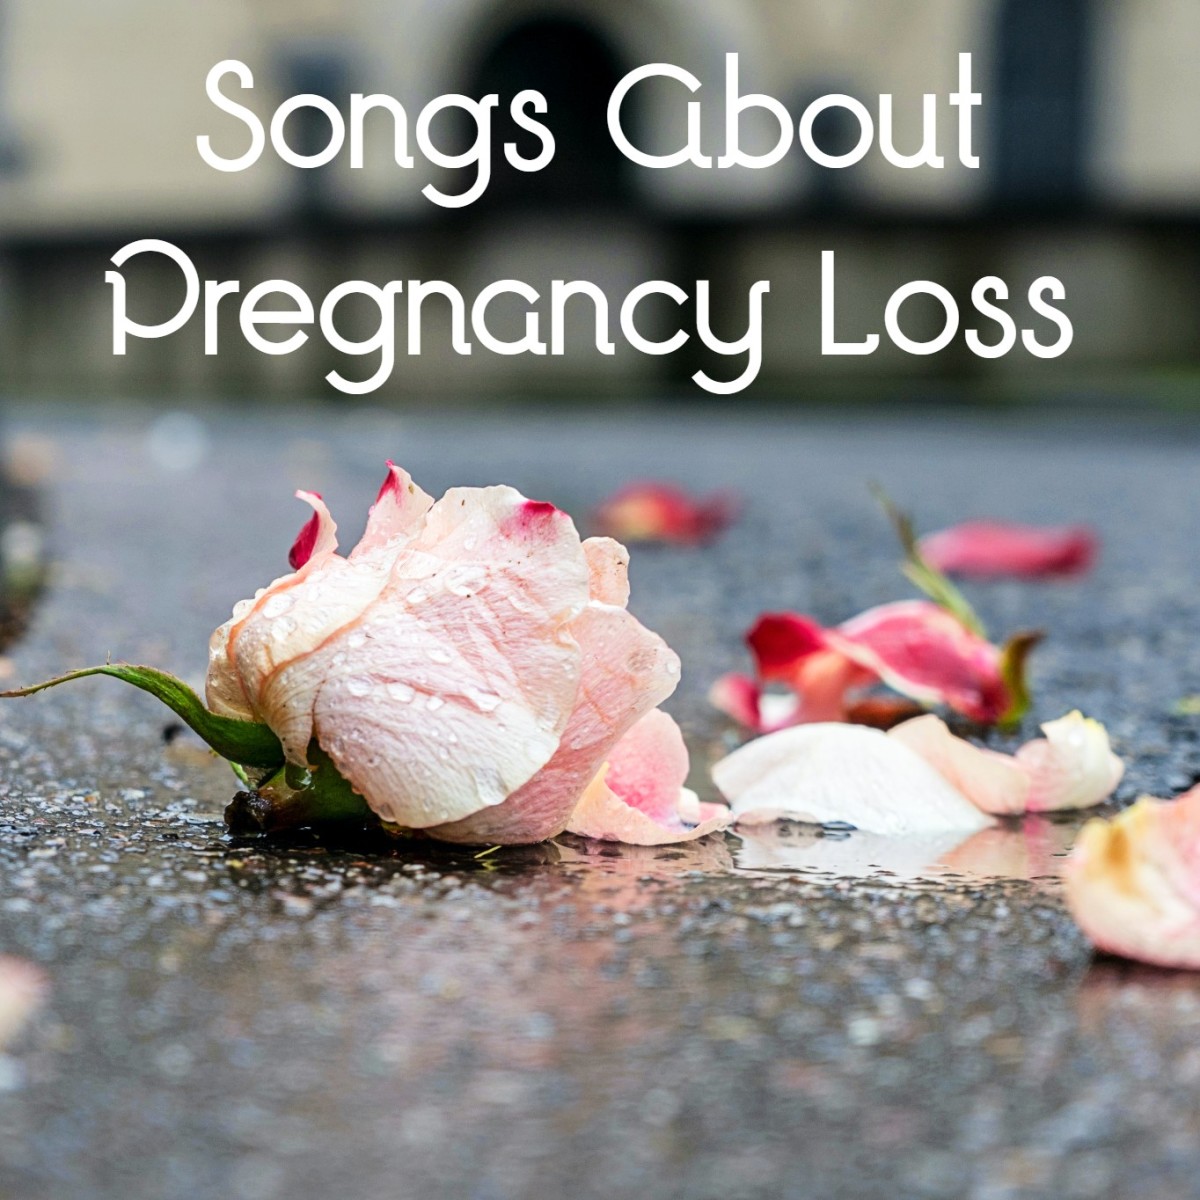 If you have experienced a pregnancy loss or miscarriage or know someone who has, make a playlist of pop, rock, and country songs about the experience as a reminder that you are not alone.